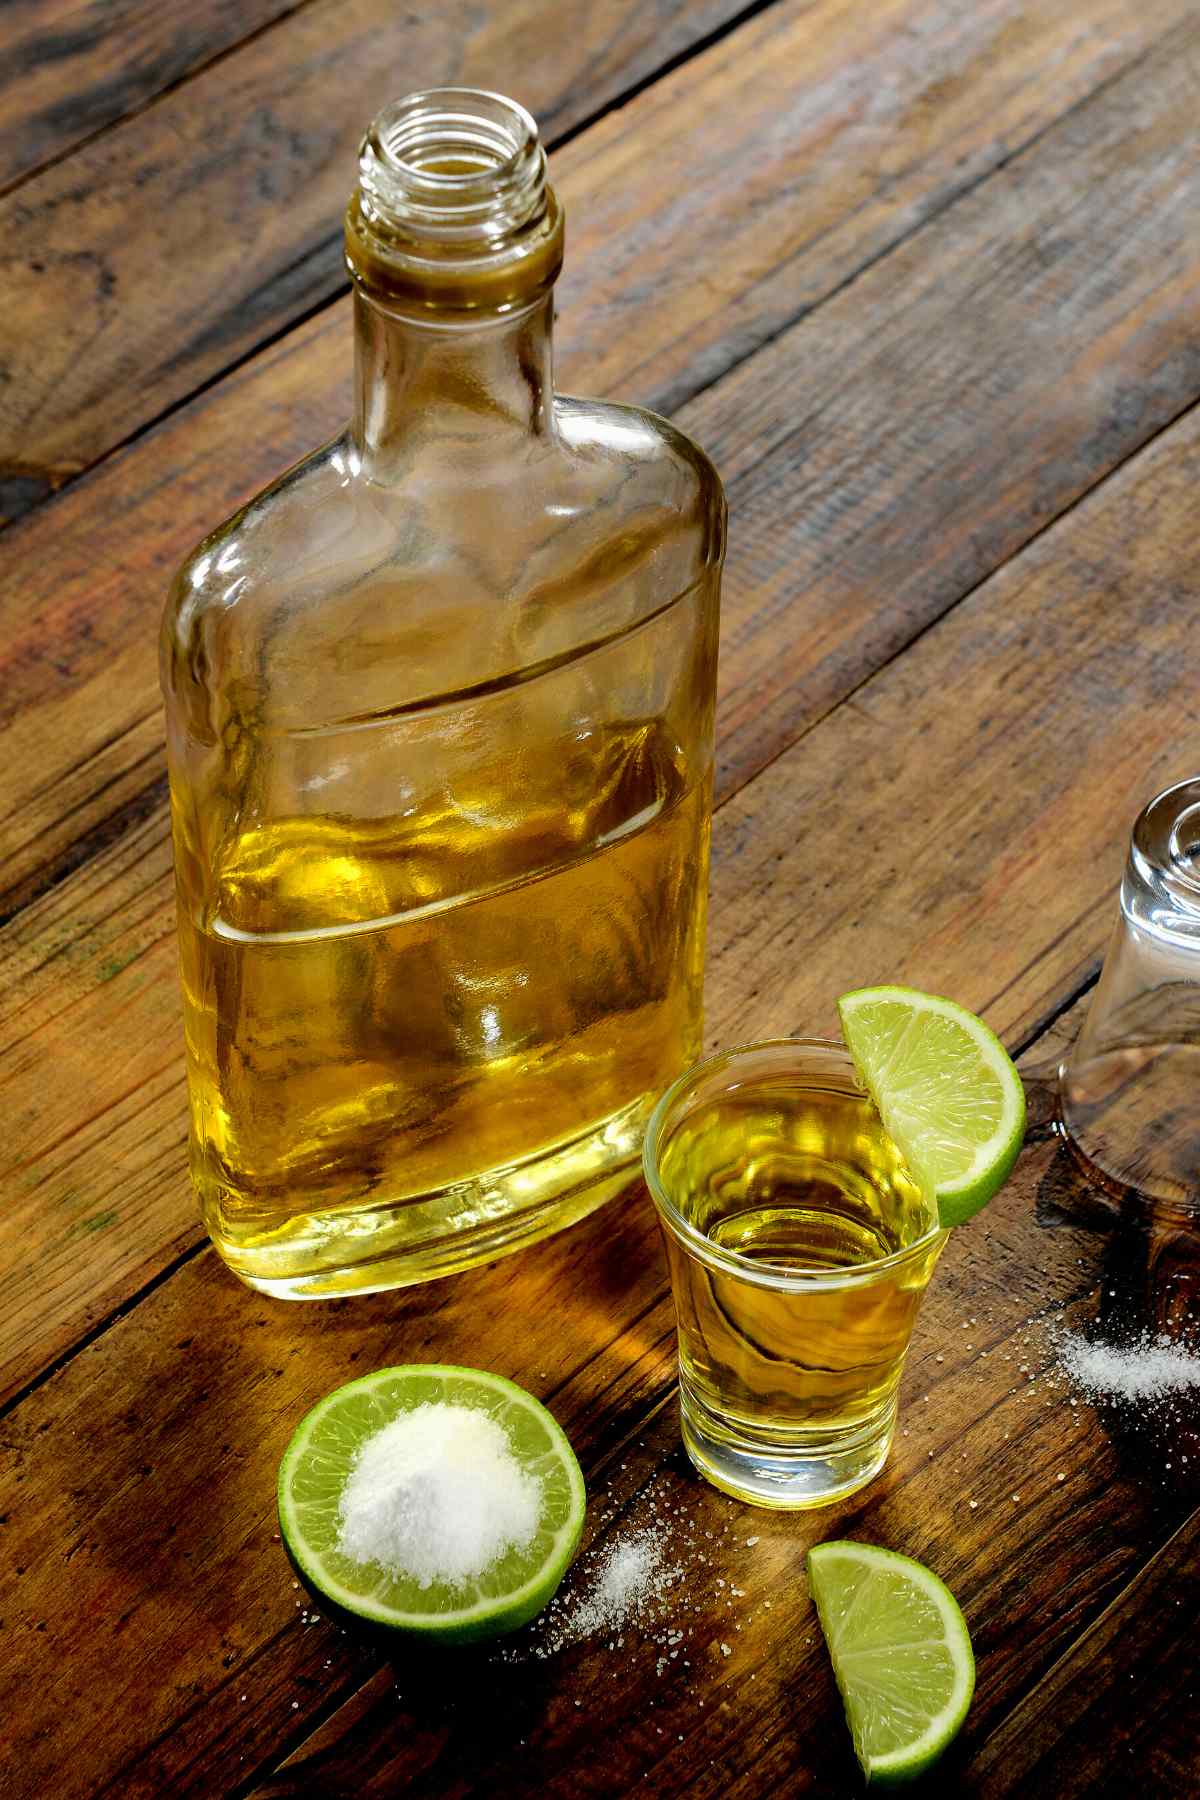 Is Tequila Keto? You may want to have a drink to celebrate a certain occasion while on a keto diet. If you’re thinking of a tequila drink, you may wonder: are you allowed to indulge? Fortunately, you can, in moderation.